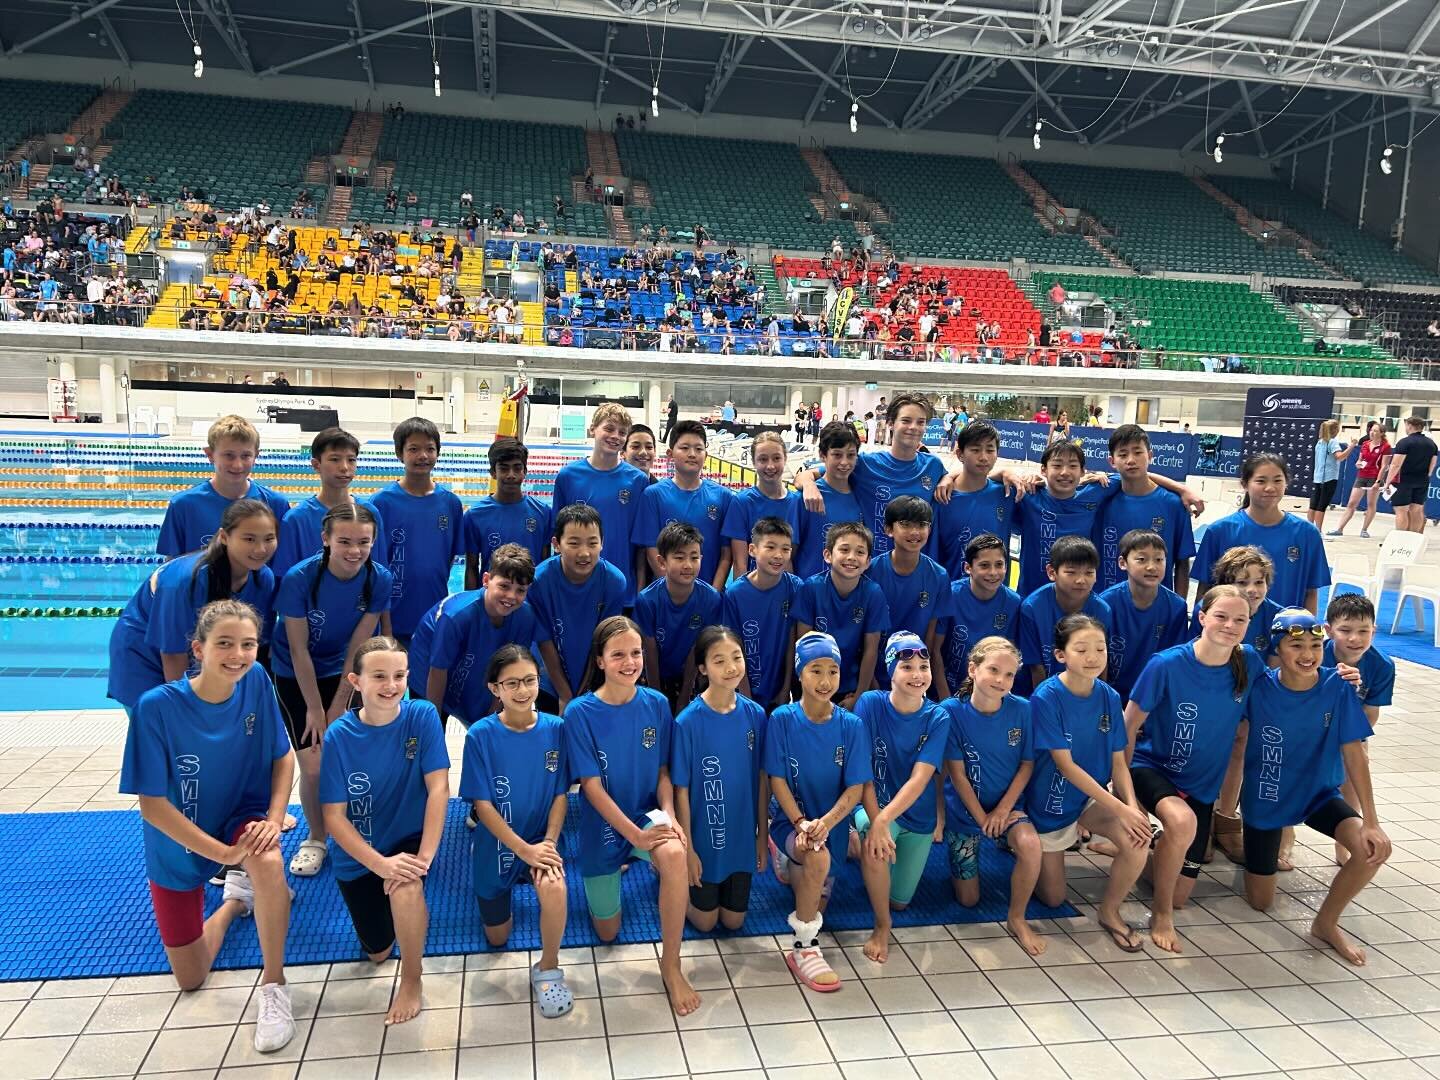 Congratulations to everyone whom competed for Swimming Metro North East which came 3rd at the 2024 Speedo Finals! Well done to all our Swimmers. Rebecca, Kate, Nick, Elizabeth, Stephanie, Aurelia, Sienna, Chloe was represented the club at SOPAC.

Spe